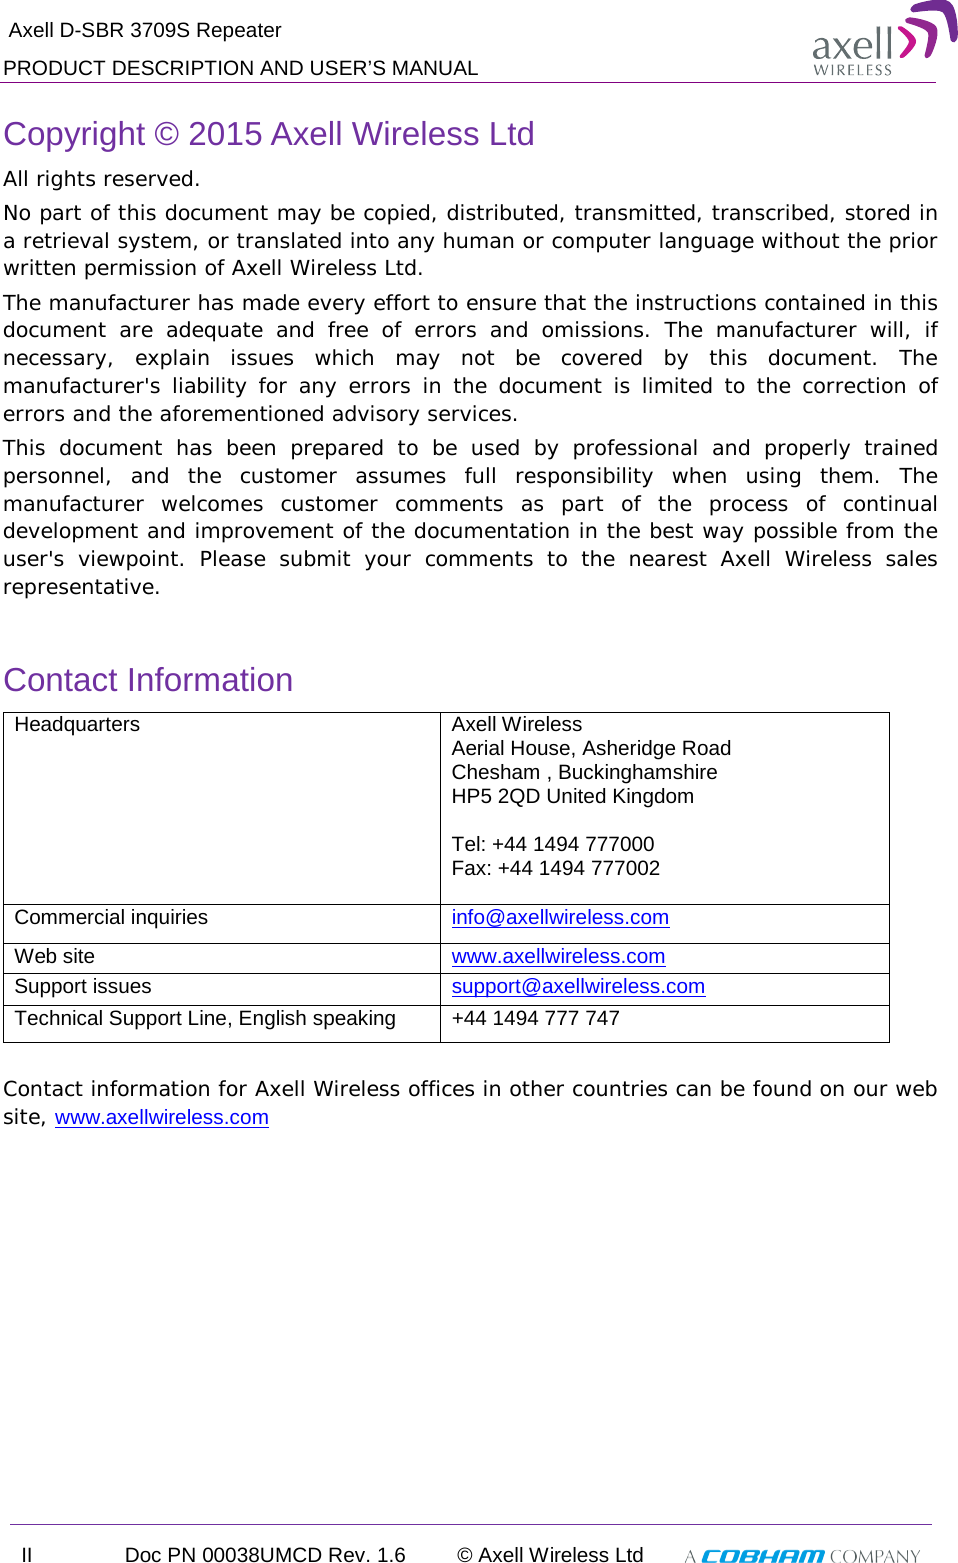  Axell D-SBR 3709S Repeater PRODUCT DESCRIPTION AND USER’S MANUAL II Doc PN 00038UMCD Rev. 1.6 © Axell Wireless Ltd   Copyright © 2015 Axell Wireless Ltd All rights reserved. No part of this document may be copied, distributed, transmitted, transcribed, stored in a retrieval system, or translated into any human or computer language without the prior written permission of Axell Wireless Ltd. The manufacturer has made every effort to ensure that the instructions contained in this document are adequate and free of errors and omissions. The manufacturer will, if necessary, explain issues which may not be covered by this document. The manufacturer&apos;s liability for any errors in the document is limited to the correction of errors and the aforementioned advisory services. This document has been prepared to be used by professional and properly trained personnel, and the customer assumes full responsibility when using them. The manufacturer welcomes customer comments as part of the process of continual development and improvement of the documentation in the best way possible from the user&apos;s viewpoint. Please submit your comments to the nearest Axell Wireless sales representative.  Contact Information Headquarters Axell Wireless Aerial House, Asheridge Road  Chesham , Buckinghamshire HP5 2QD United Kingdom   Tel: +44 1494 777000  Fax: +44 1494 777002   Commercial inquiries info@axellwireless.com Web site www.axellwireless.com Support issues support@axellwireless.com Technical Support Line, English speaking +44 1494 777 747  Contact information for Axell Wireless offices in other countries can be found on our web site, www.axellwireless.com     